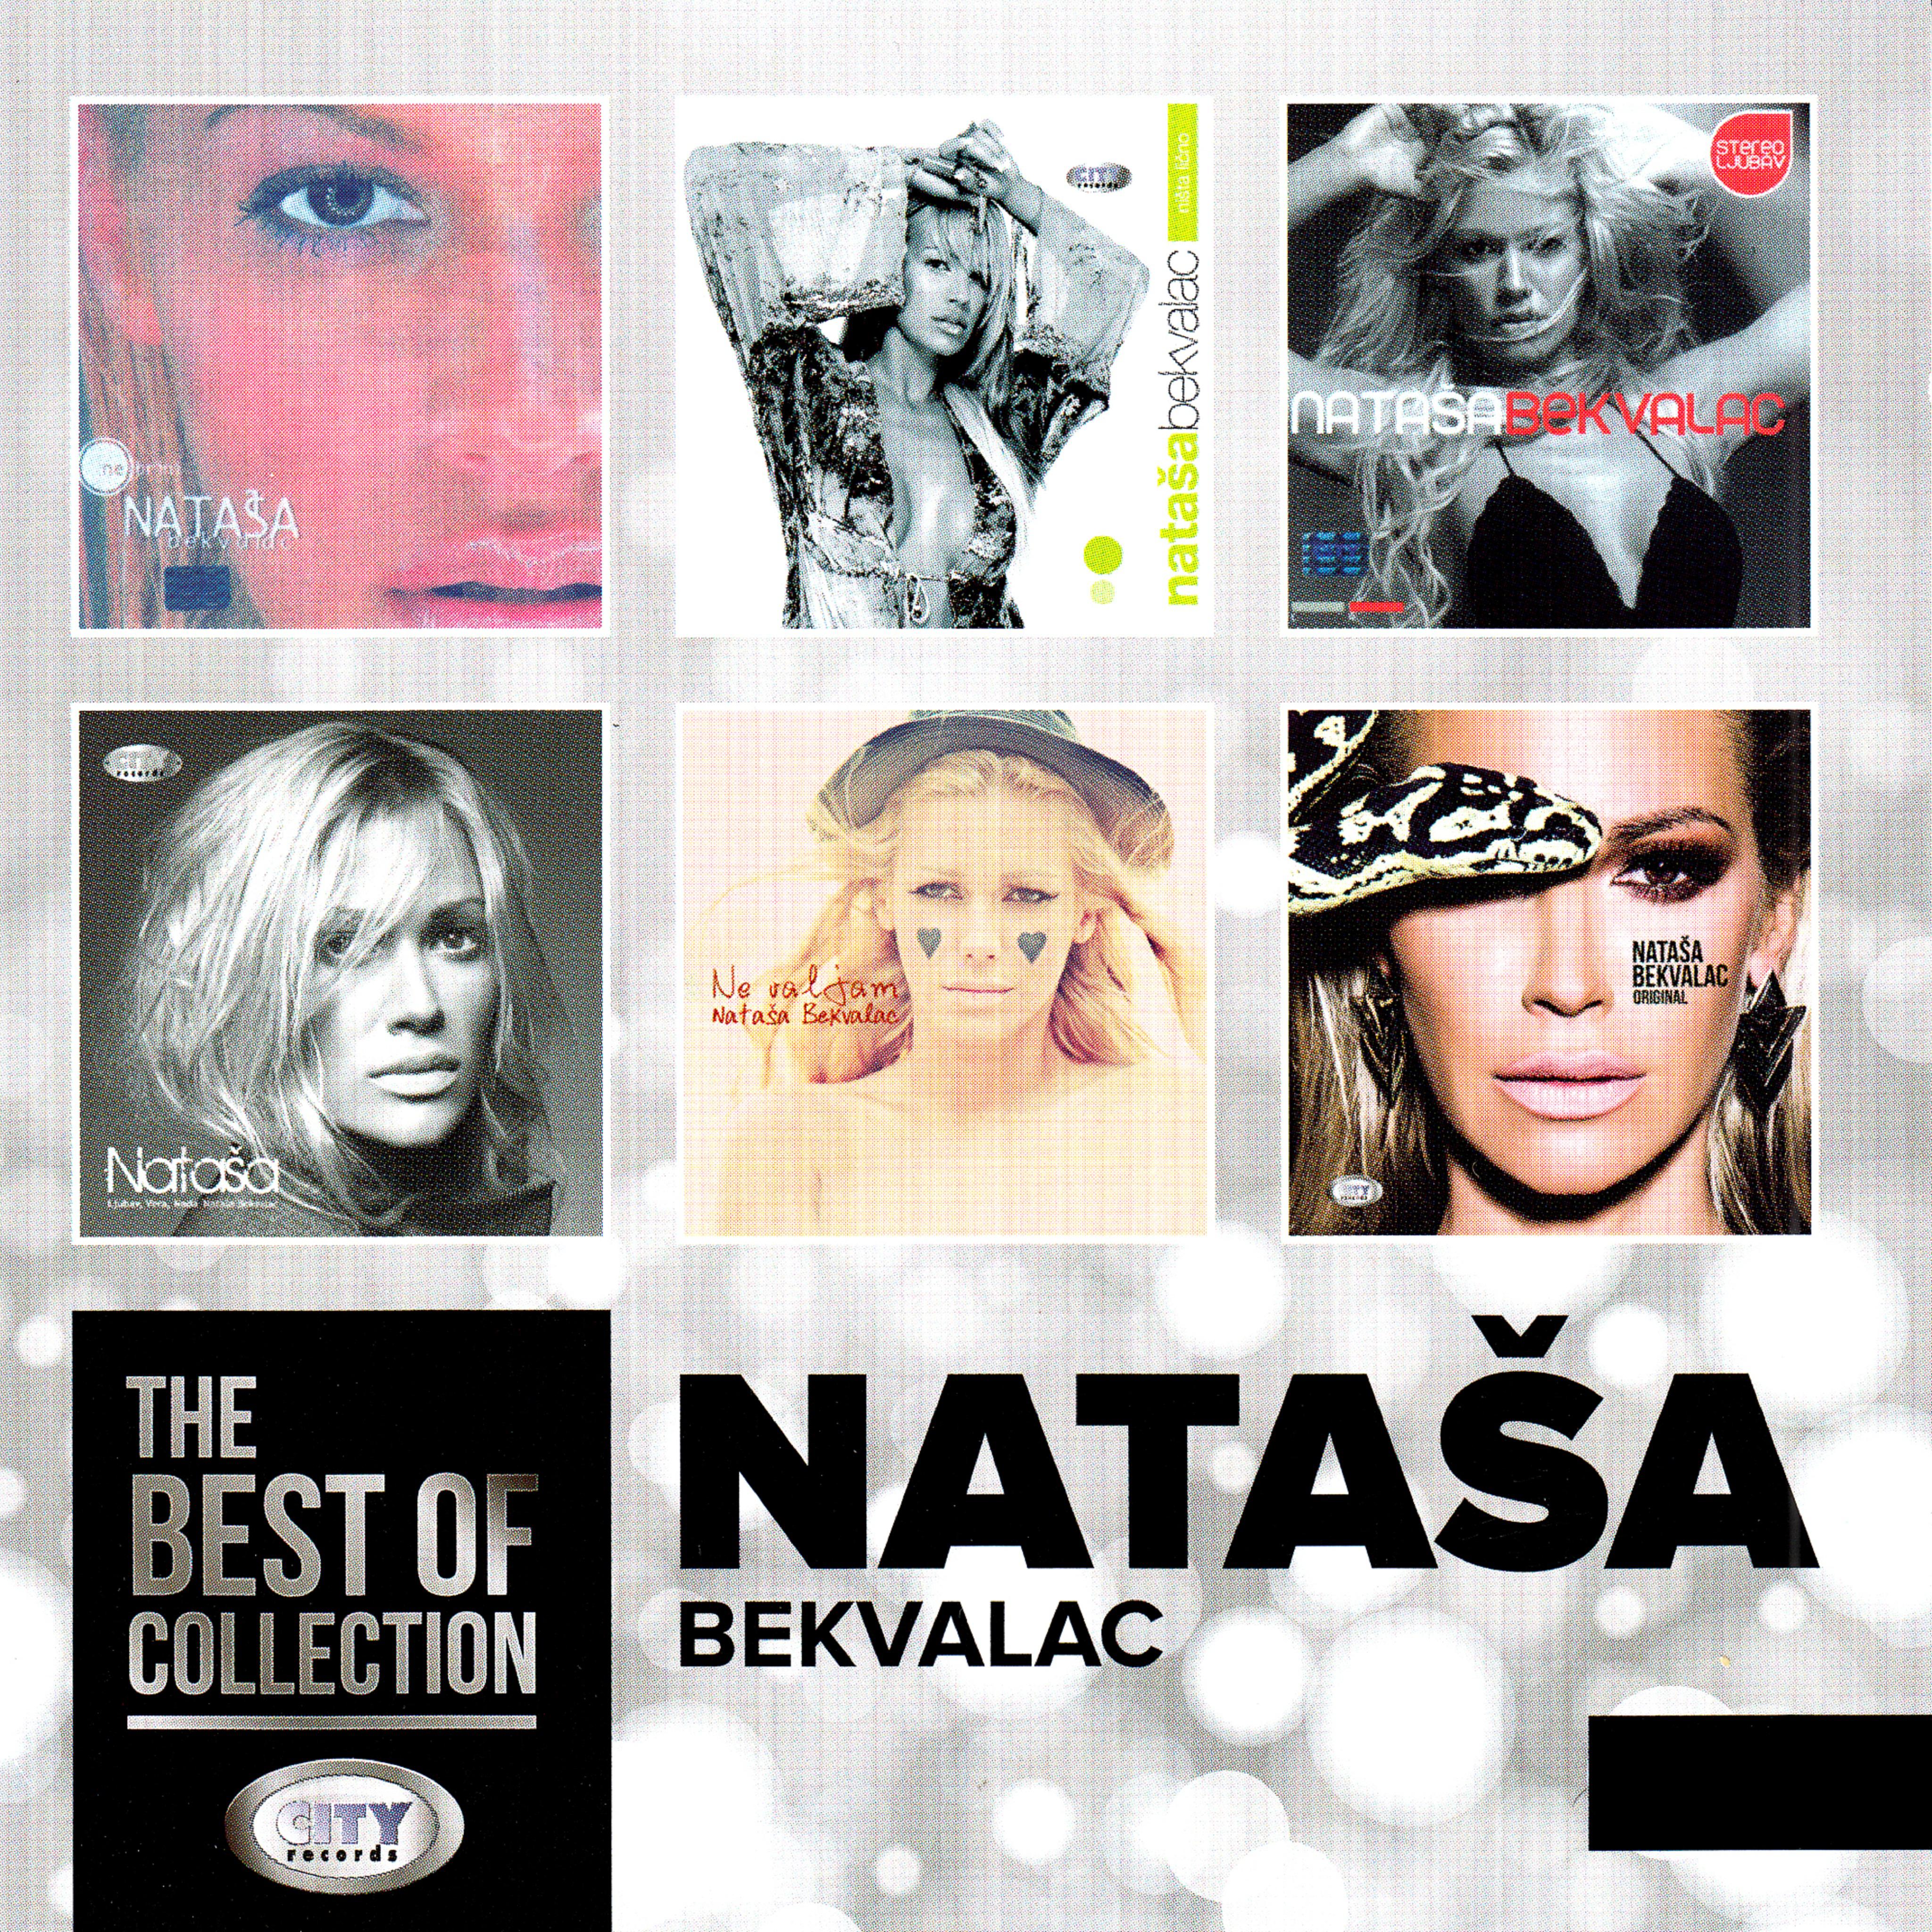 The Best of Collection Nata a Bekvalac